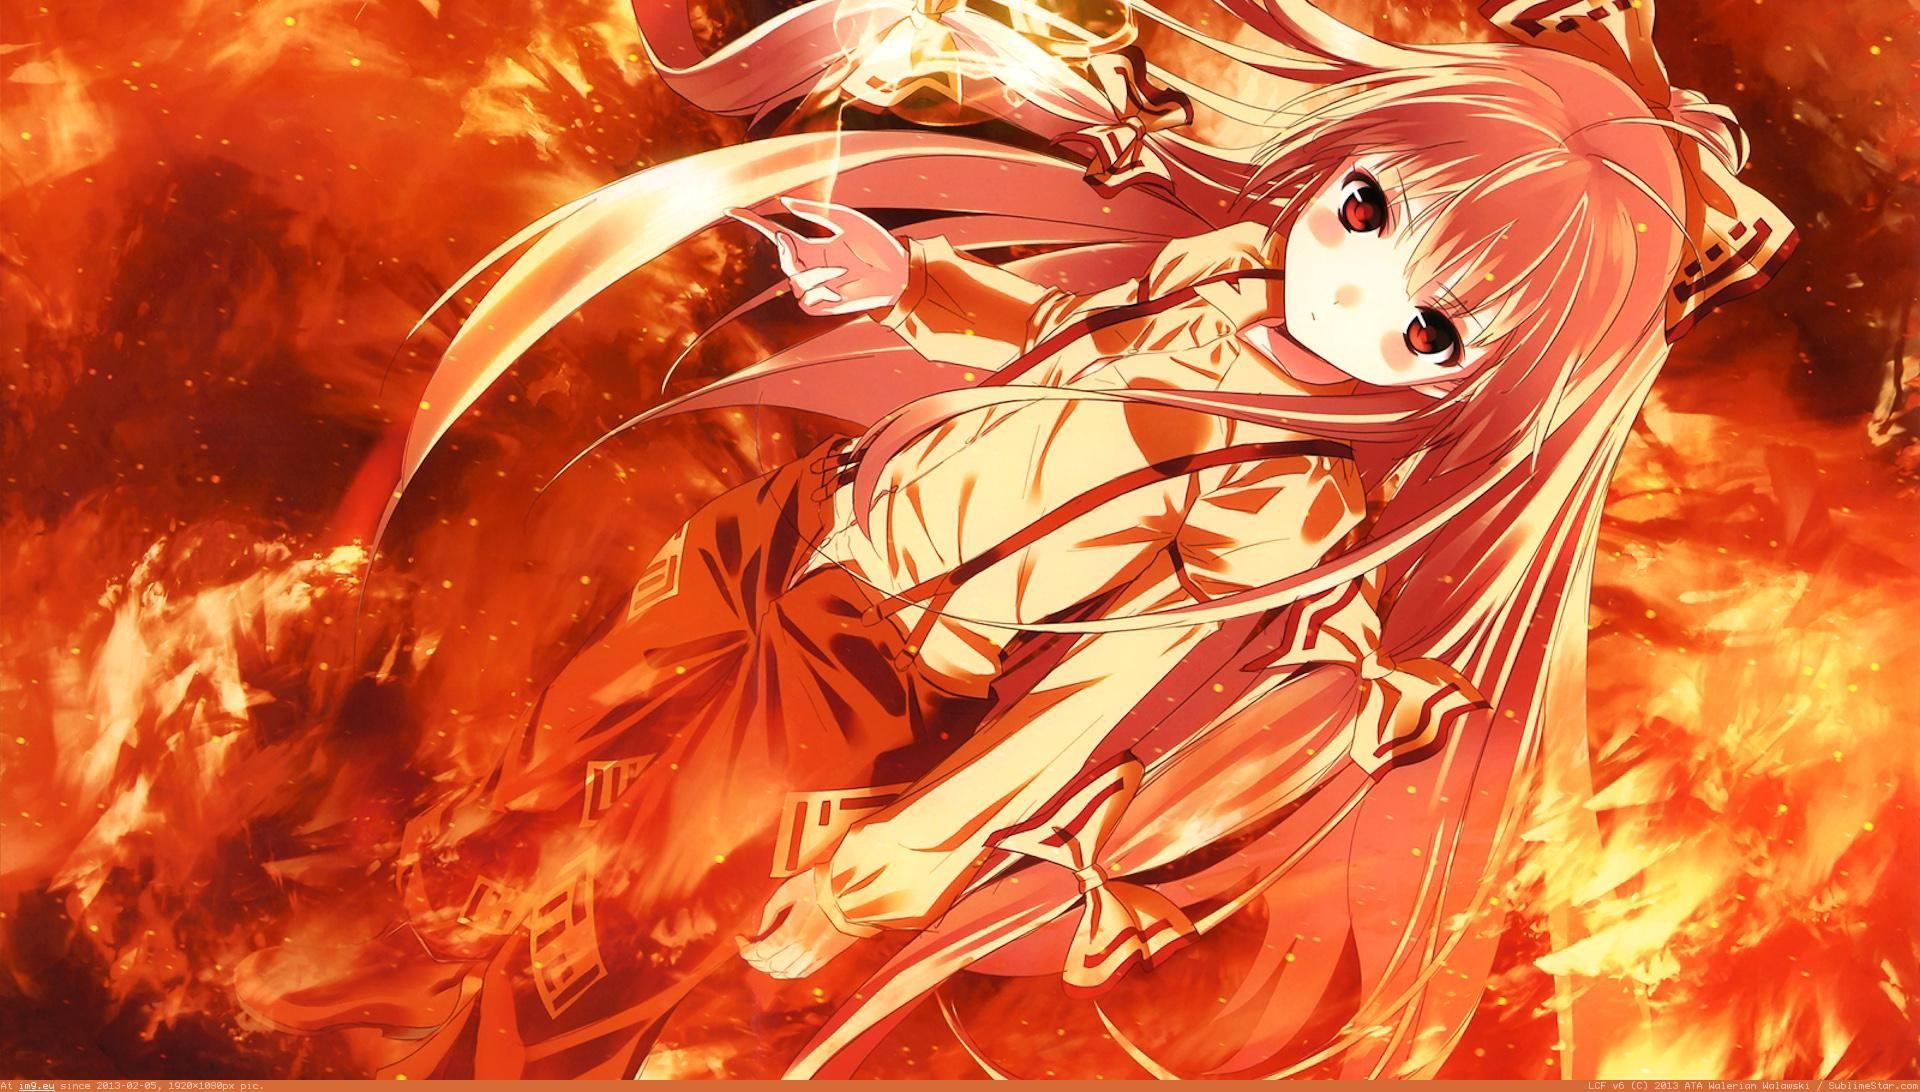 100+] Fire Anime Wallpapers | Wallpapers.com